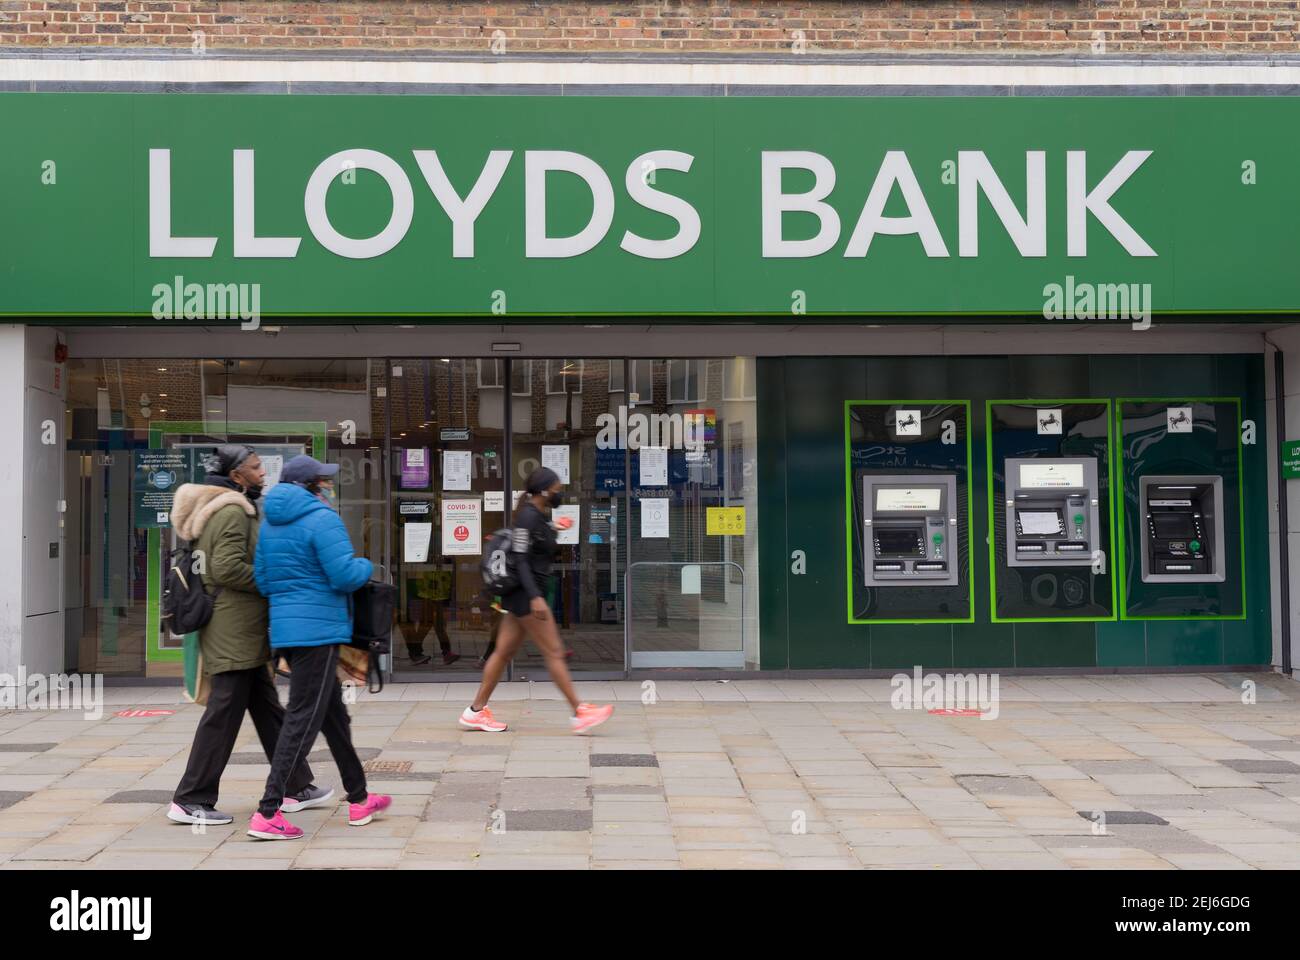 customers wearing face mask outside branch entrance to Lloyds Bank, White letter banner in green background and  two cash machines on the wall Stock Photo